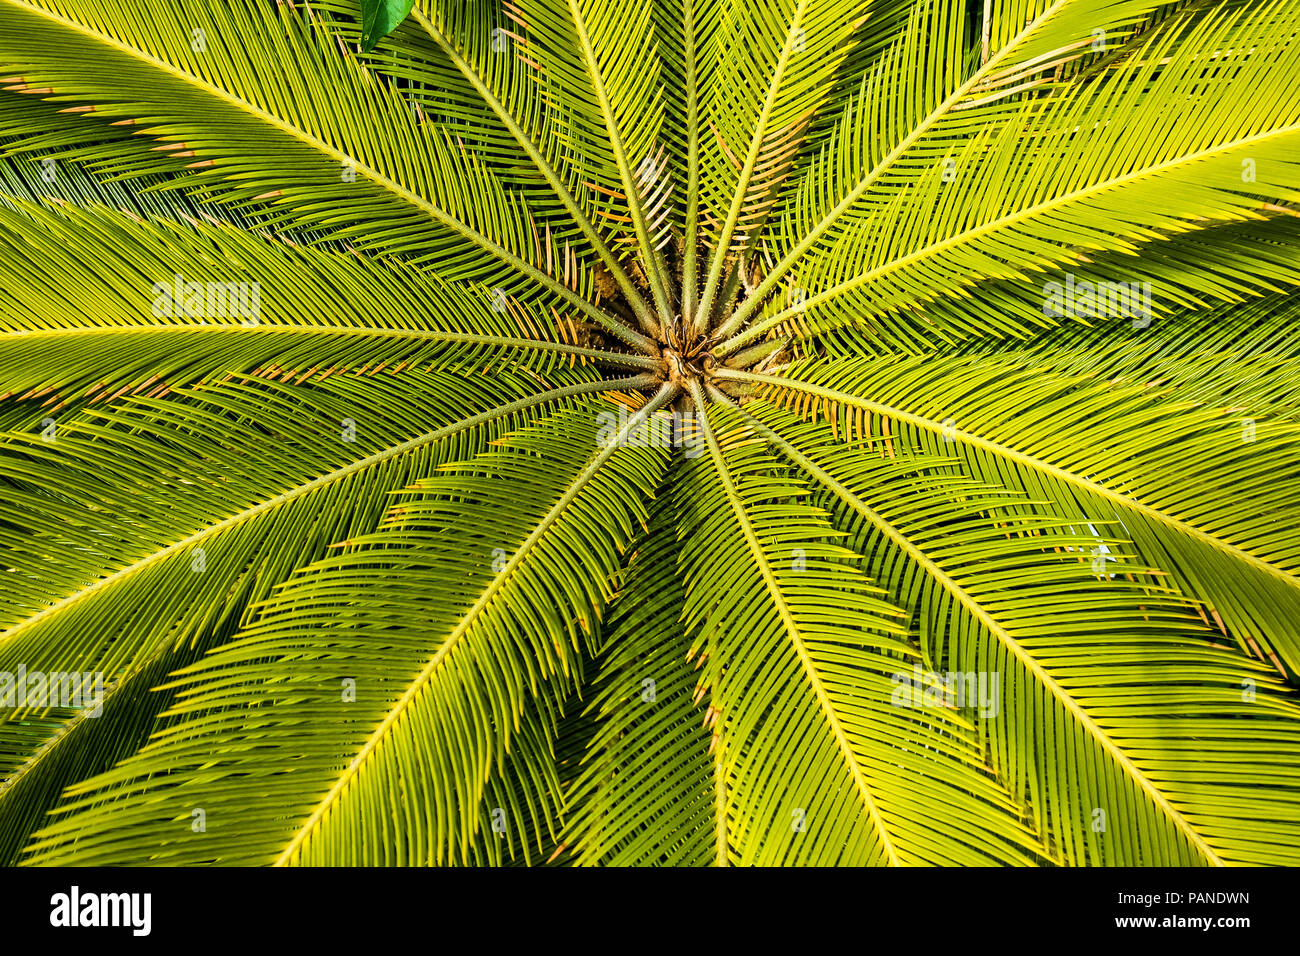 The leaves of the Japanes Sago Palm Cycas revoluta. Stock Photo